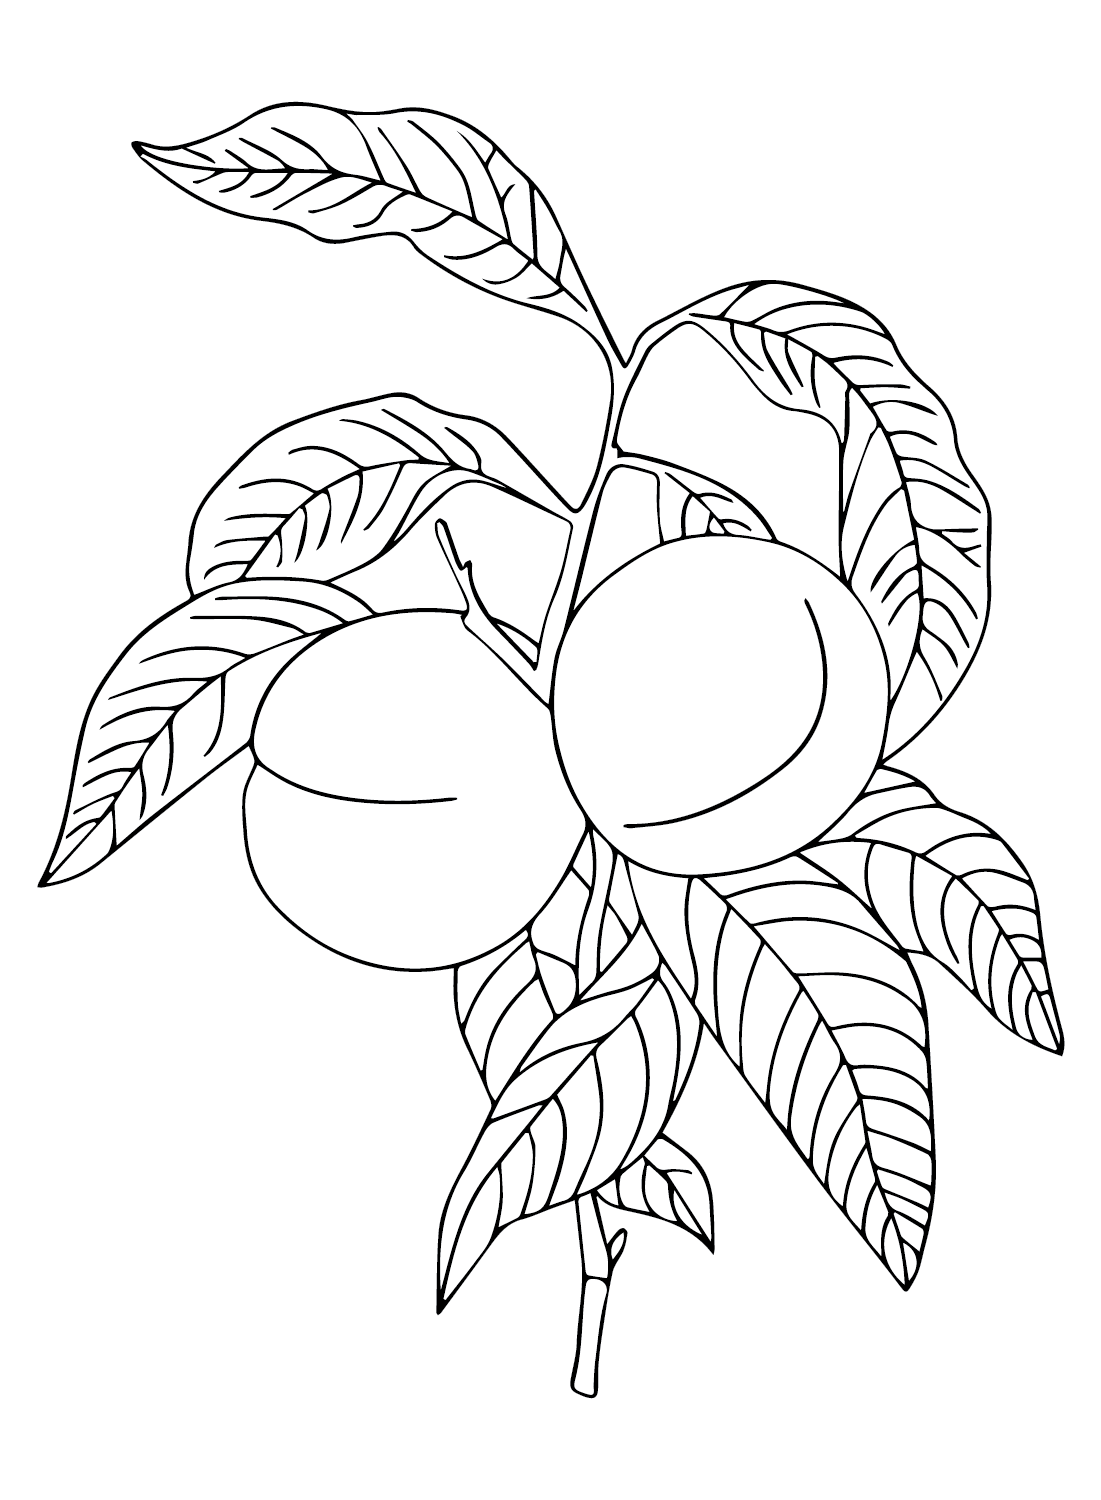 Nectarine color Sheets Coloring Page